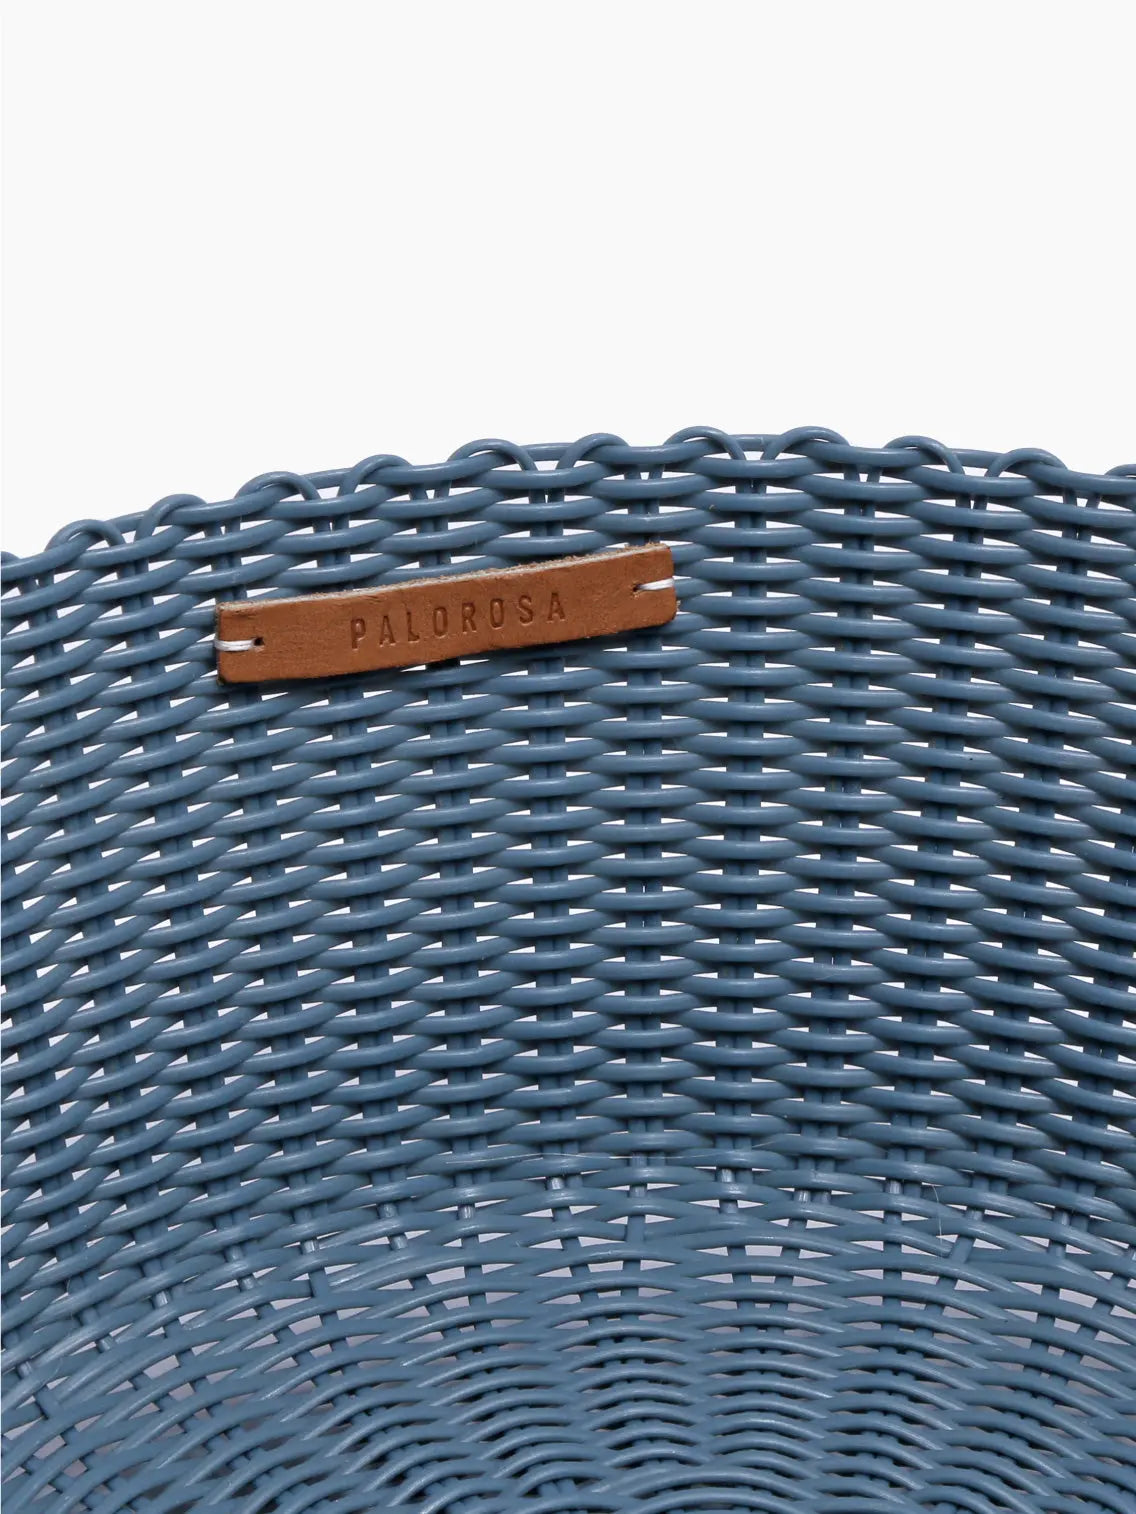 A round blue woven storage basket with a textured pattern, perfect to store your essentials. The Fruit Basket Paloblue Small by Palorosa features a small rectangular leather patch stitched on the upper edge. Both the interior and exterior surfaces boast a uniform woven design, available exclusively at Bassalstore in Barcelona.